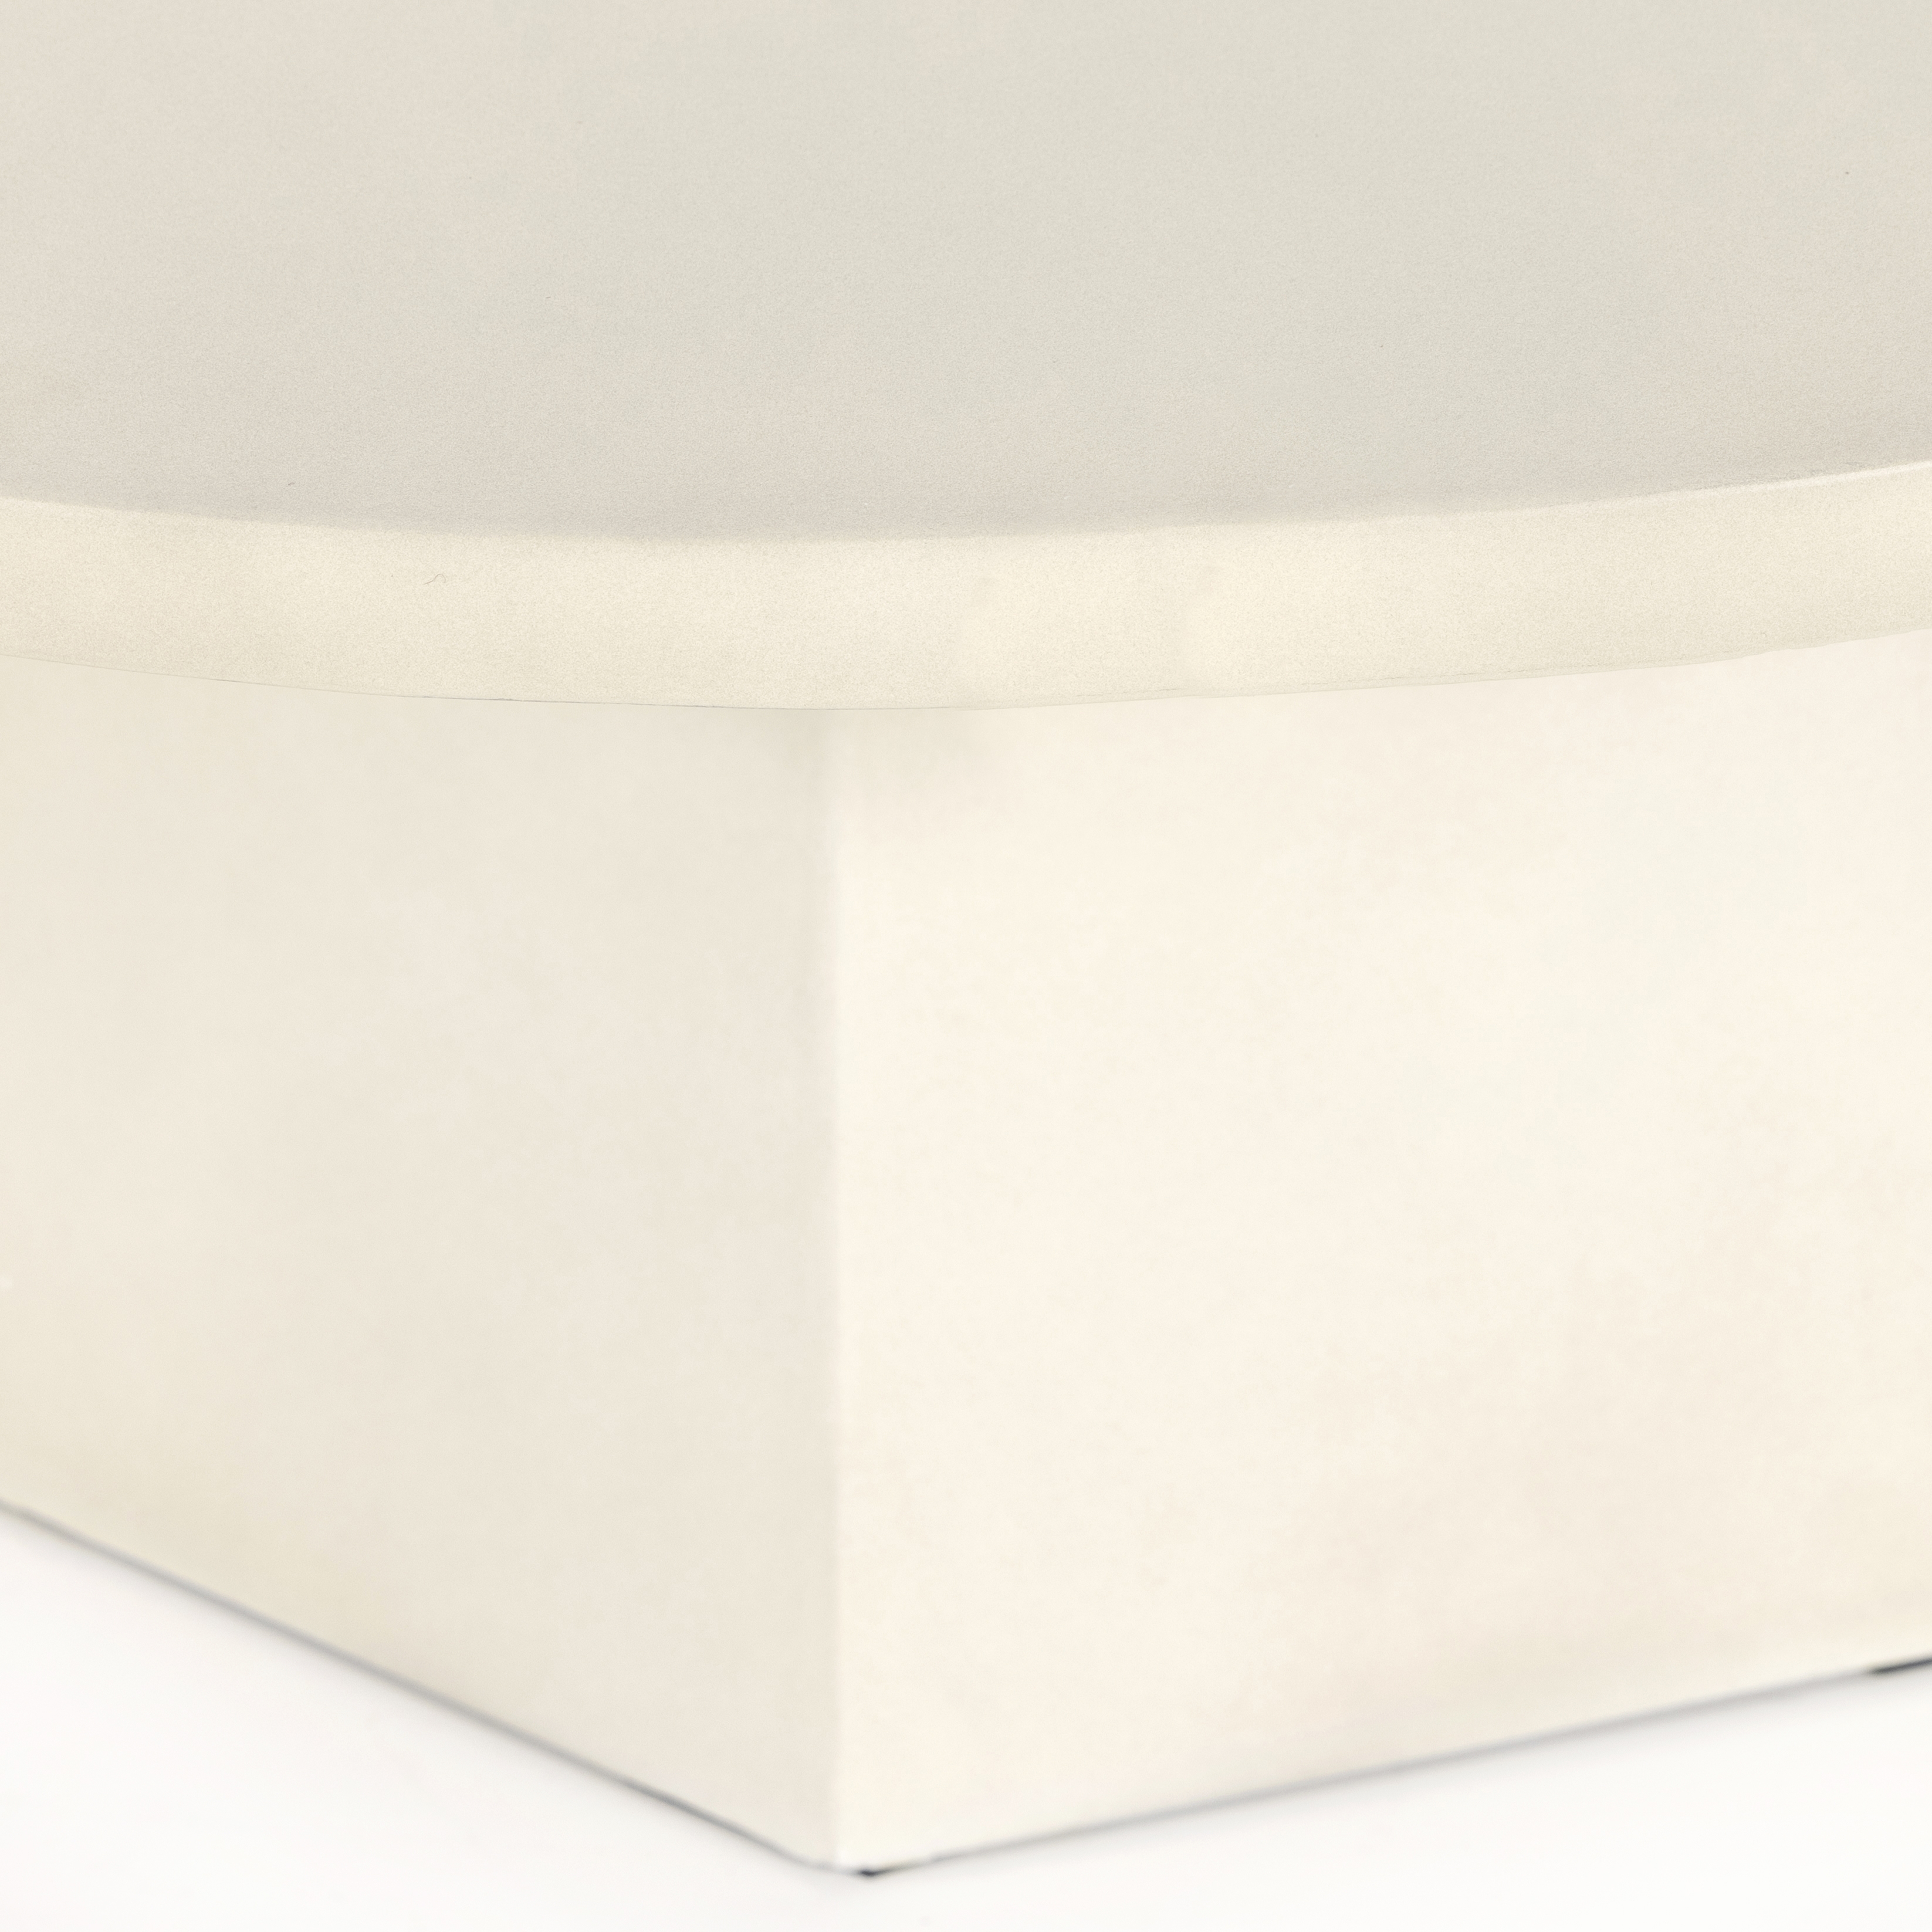 Bowman Outdoor Coffee Table-White Cncrt - Image 7